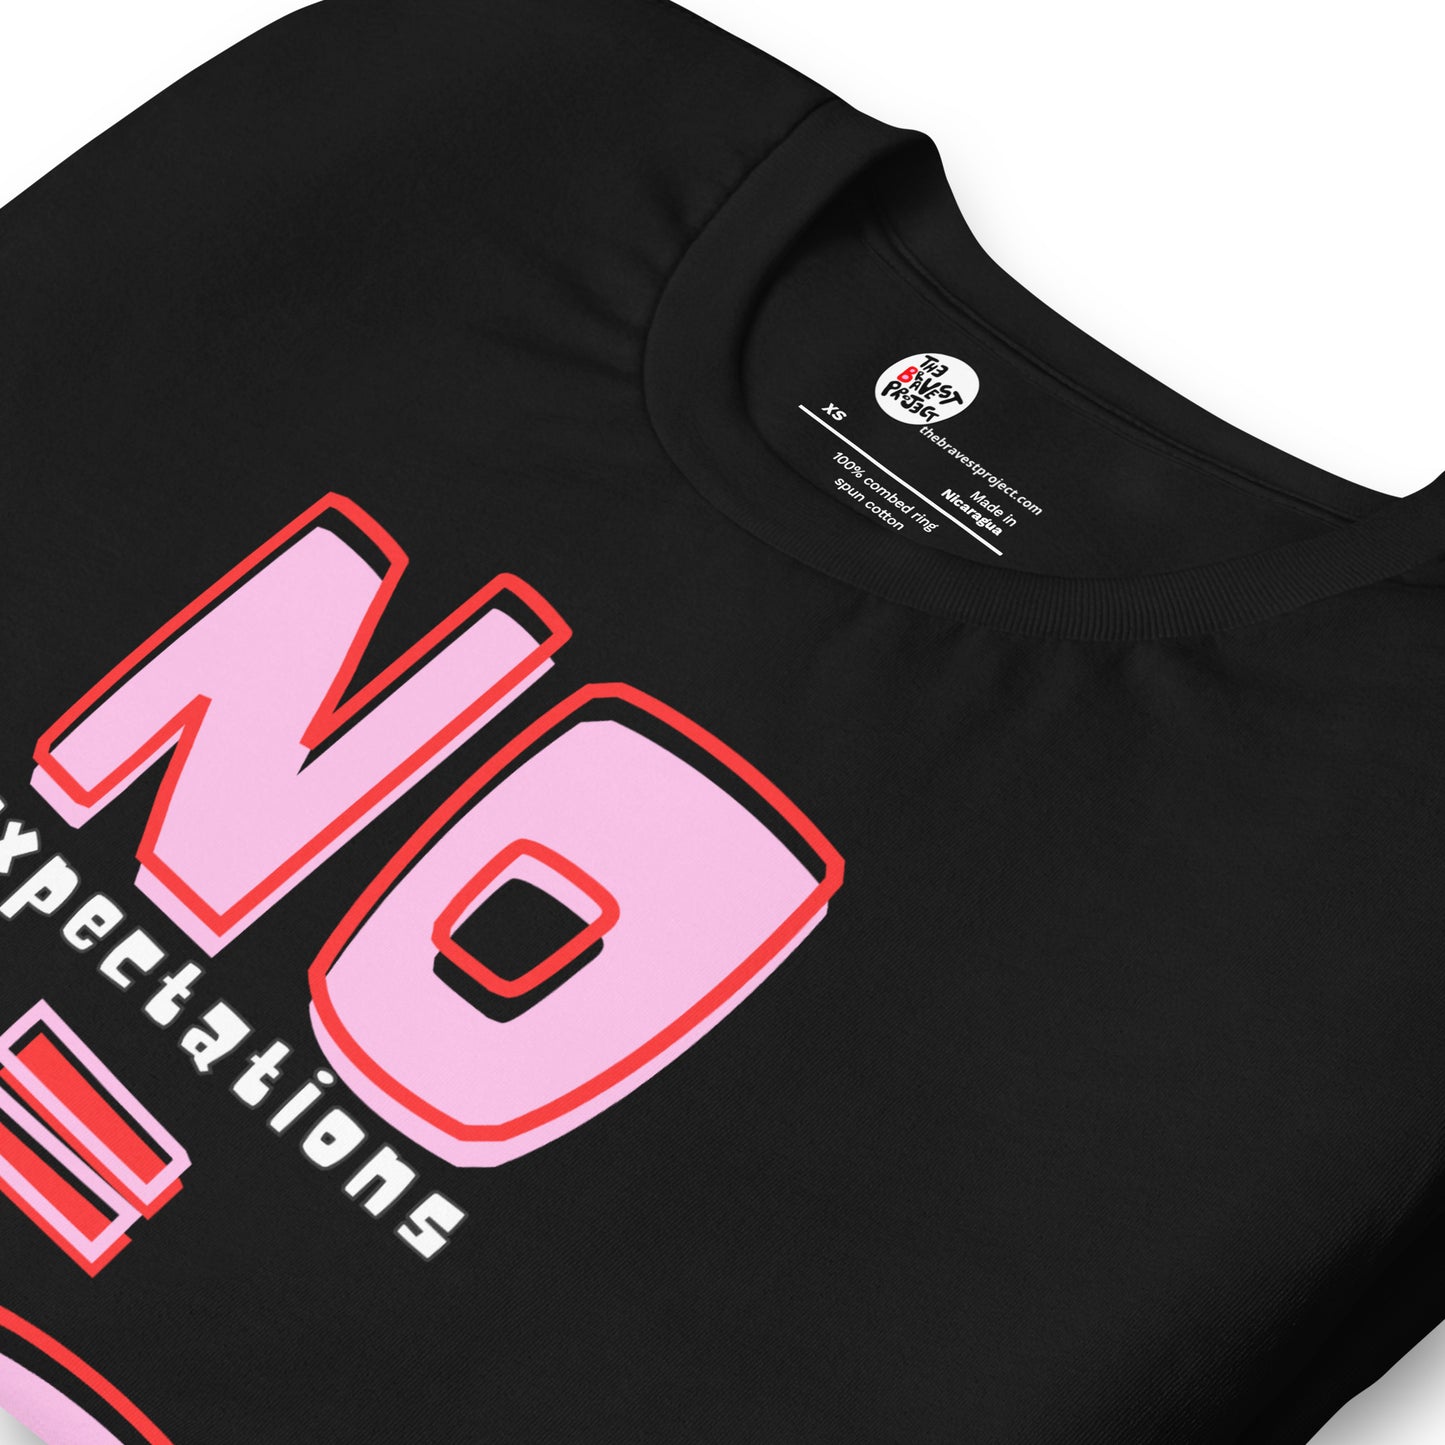 No Expectations No Disappointments Unisex t-shirt - Pink on Black